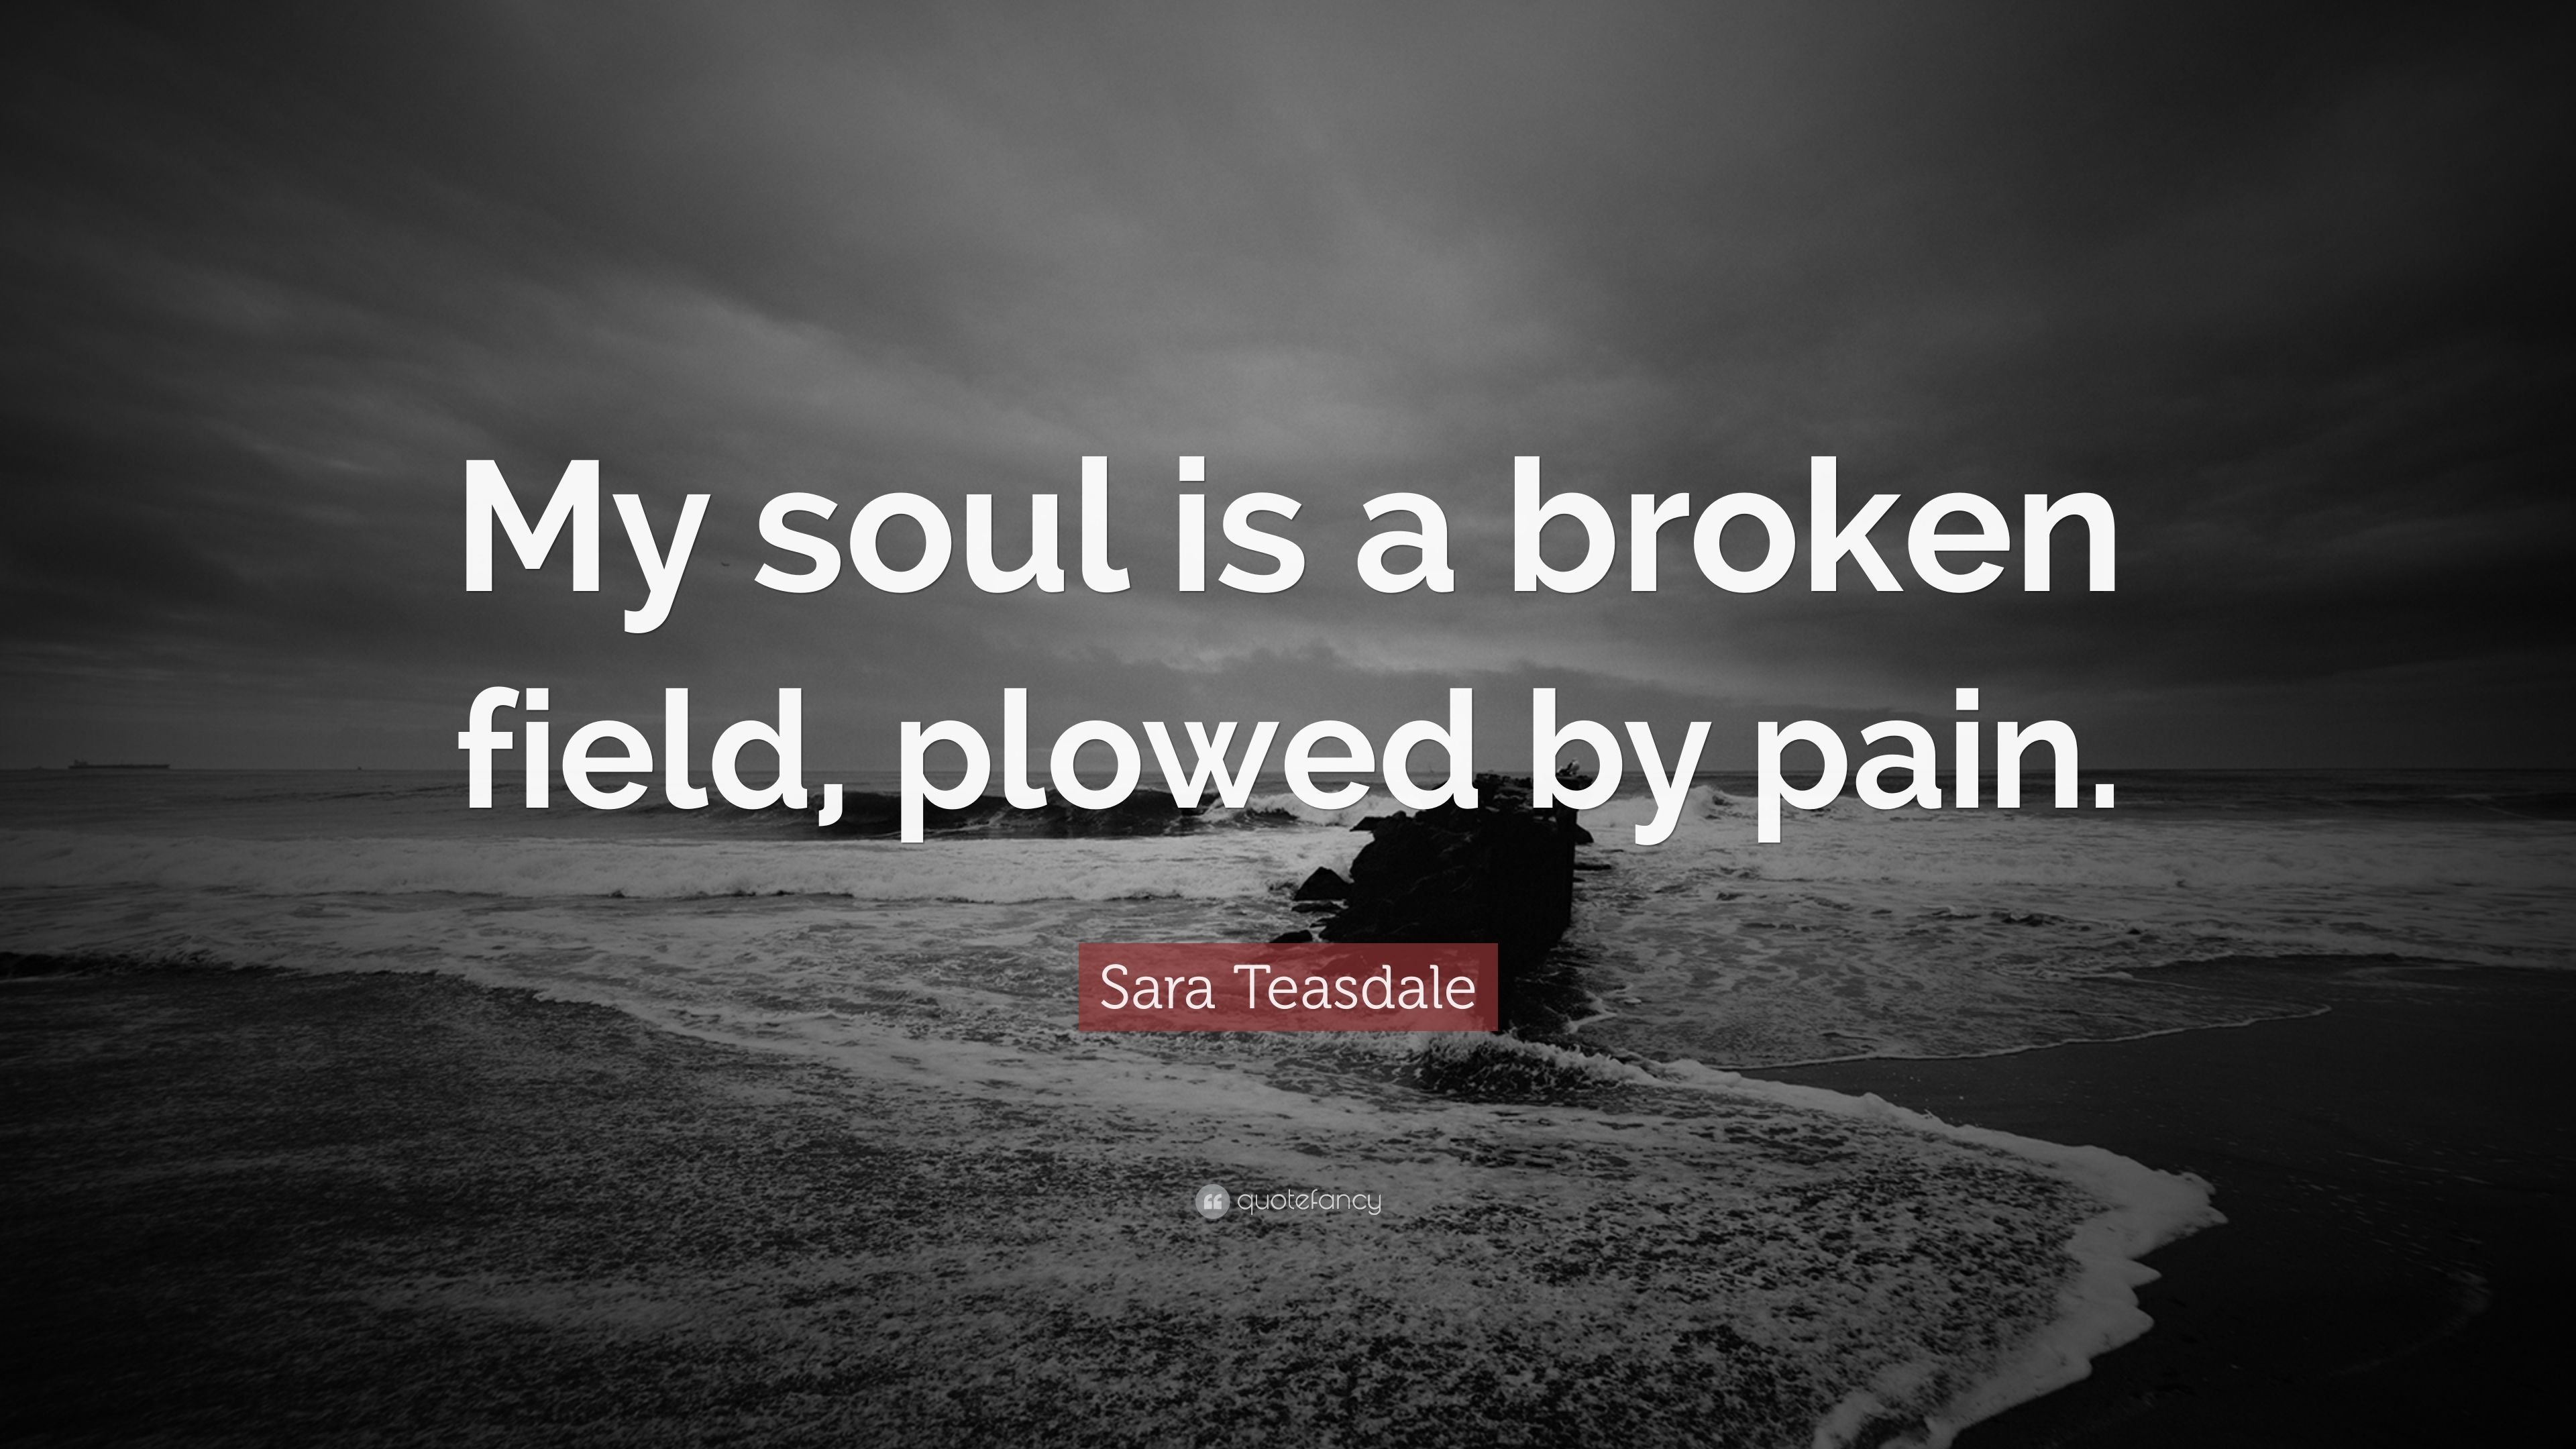 Sara Teasdale Quote: "My soul is a broken field, plowed by pain. 